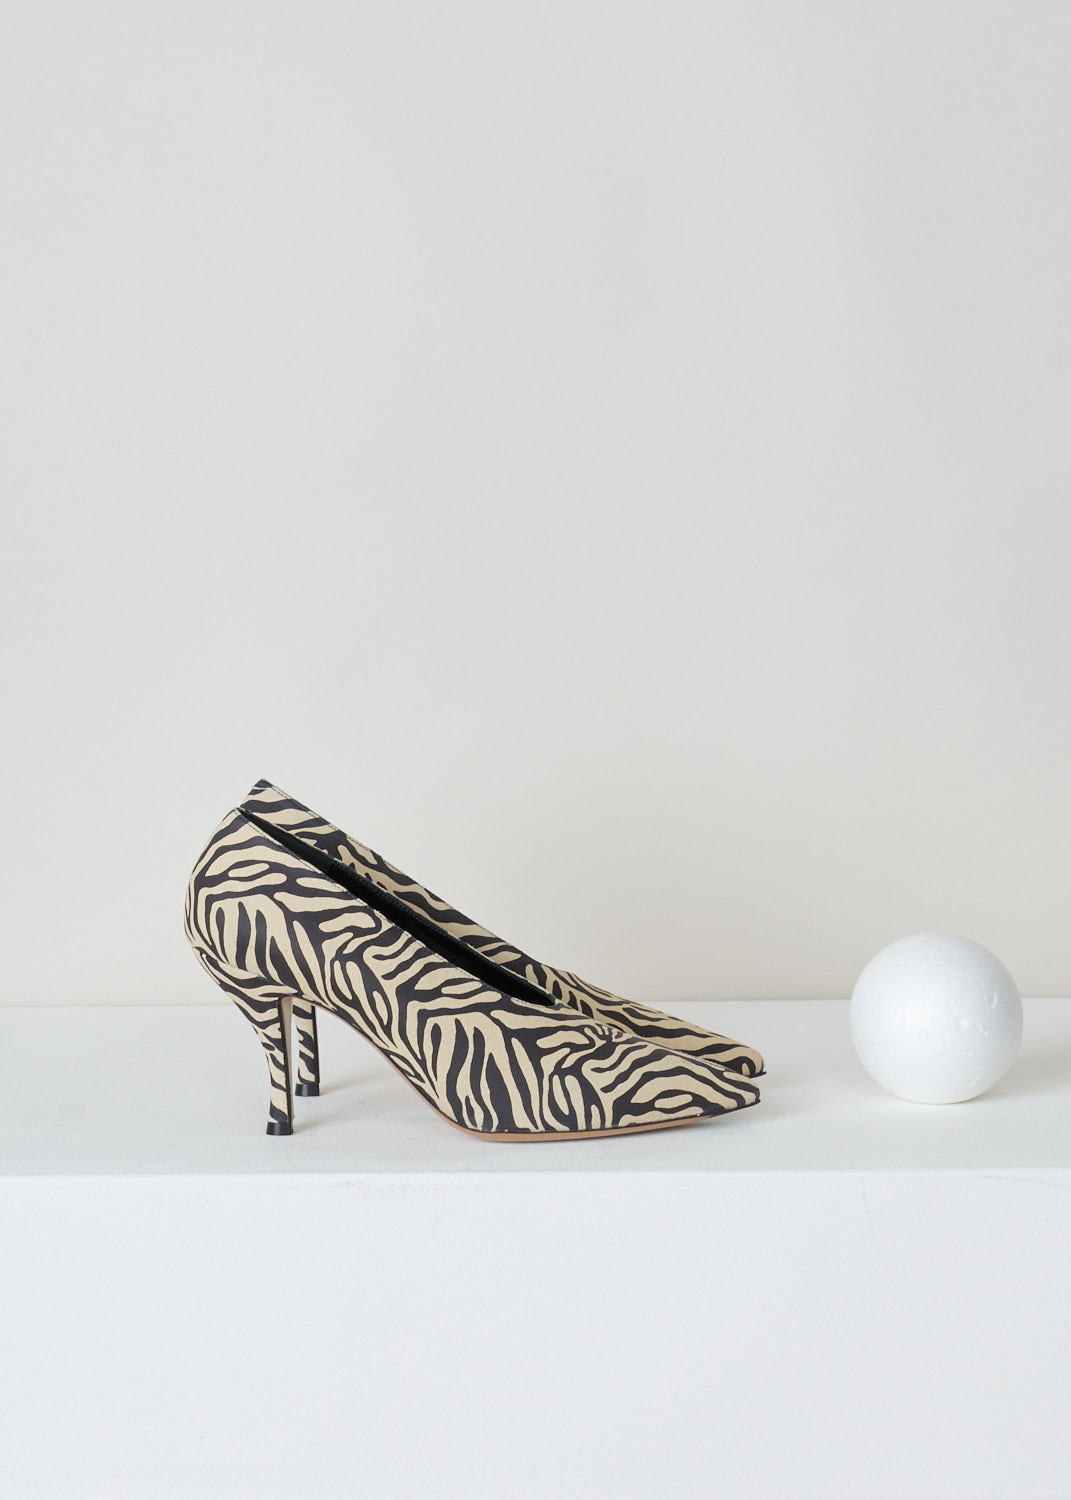 Dries van Noten, Zebra print pumps in black and white, WS27_187_H80_QU102_ECRU005, white black, side, Leather printed with a zebra print, featuring an pointed toe section and tapered heels. this pumps would fit any occasion either with a dress or some pants.

Heel height: 8.5 cm / 3.3 inch. 